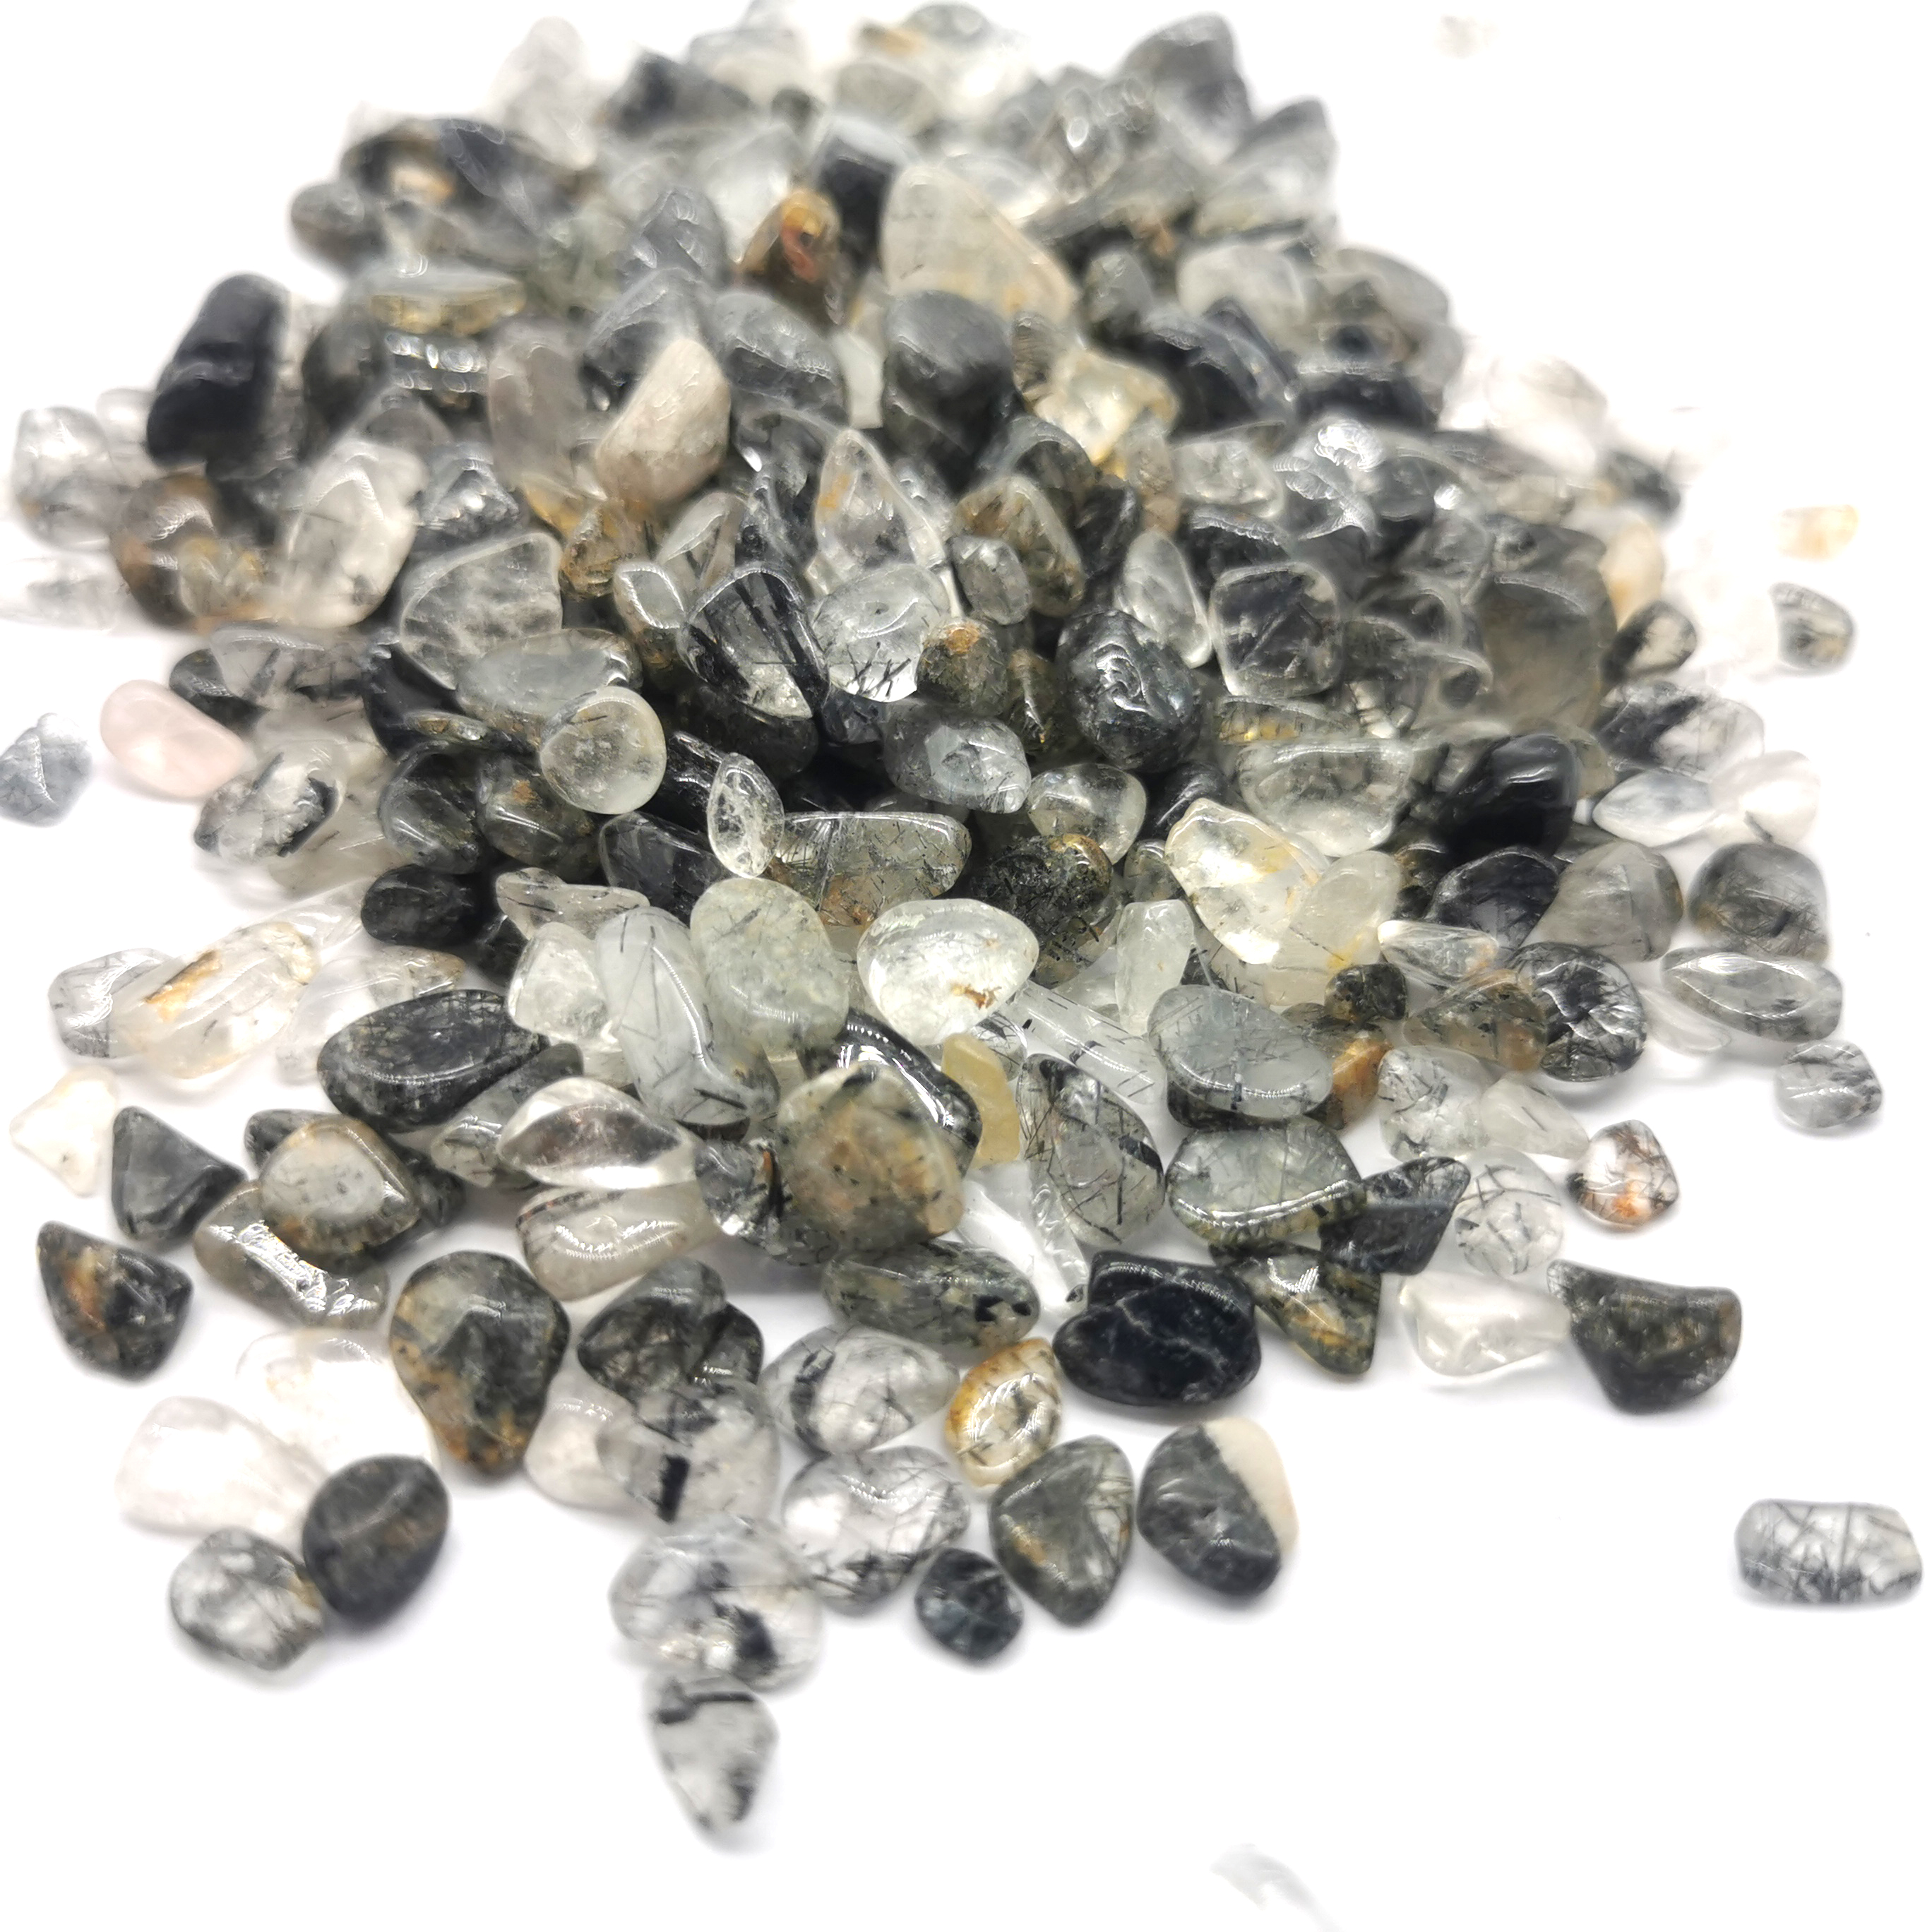 Natural agate stone gravel stone Featured Image